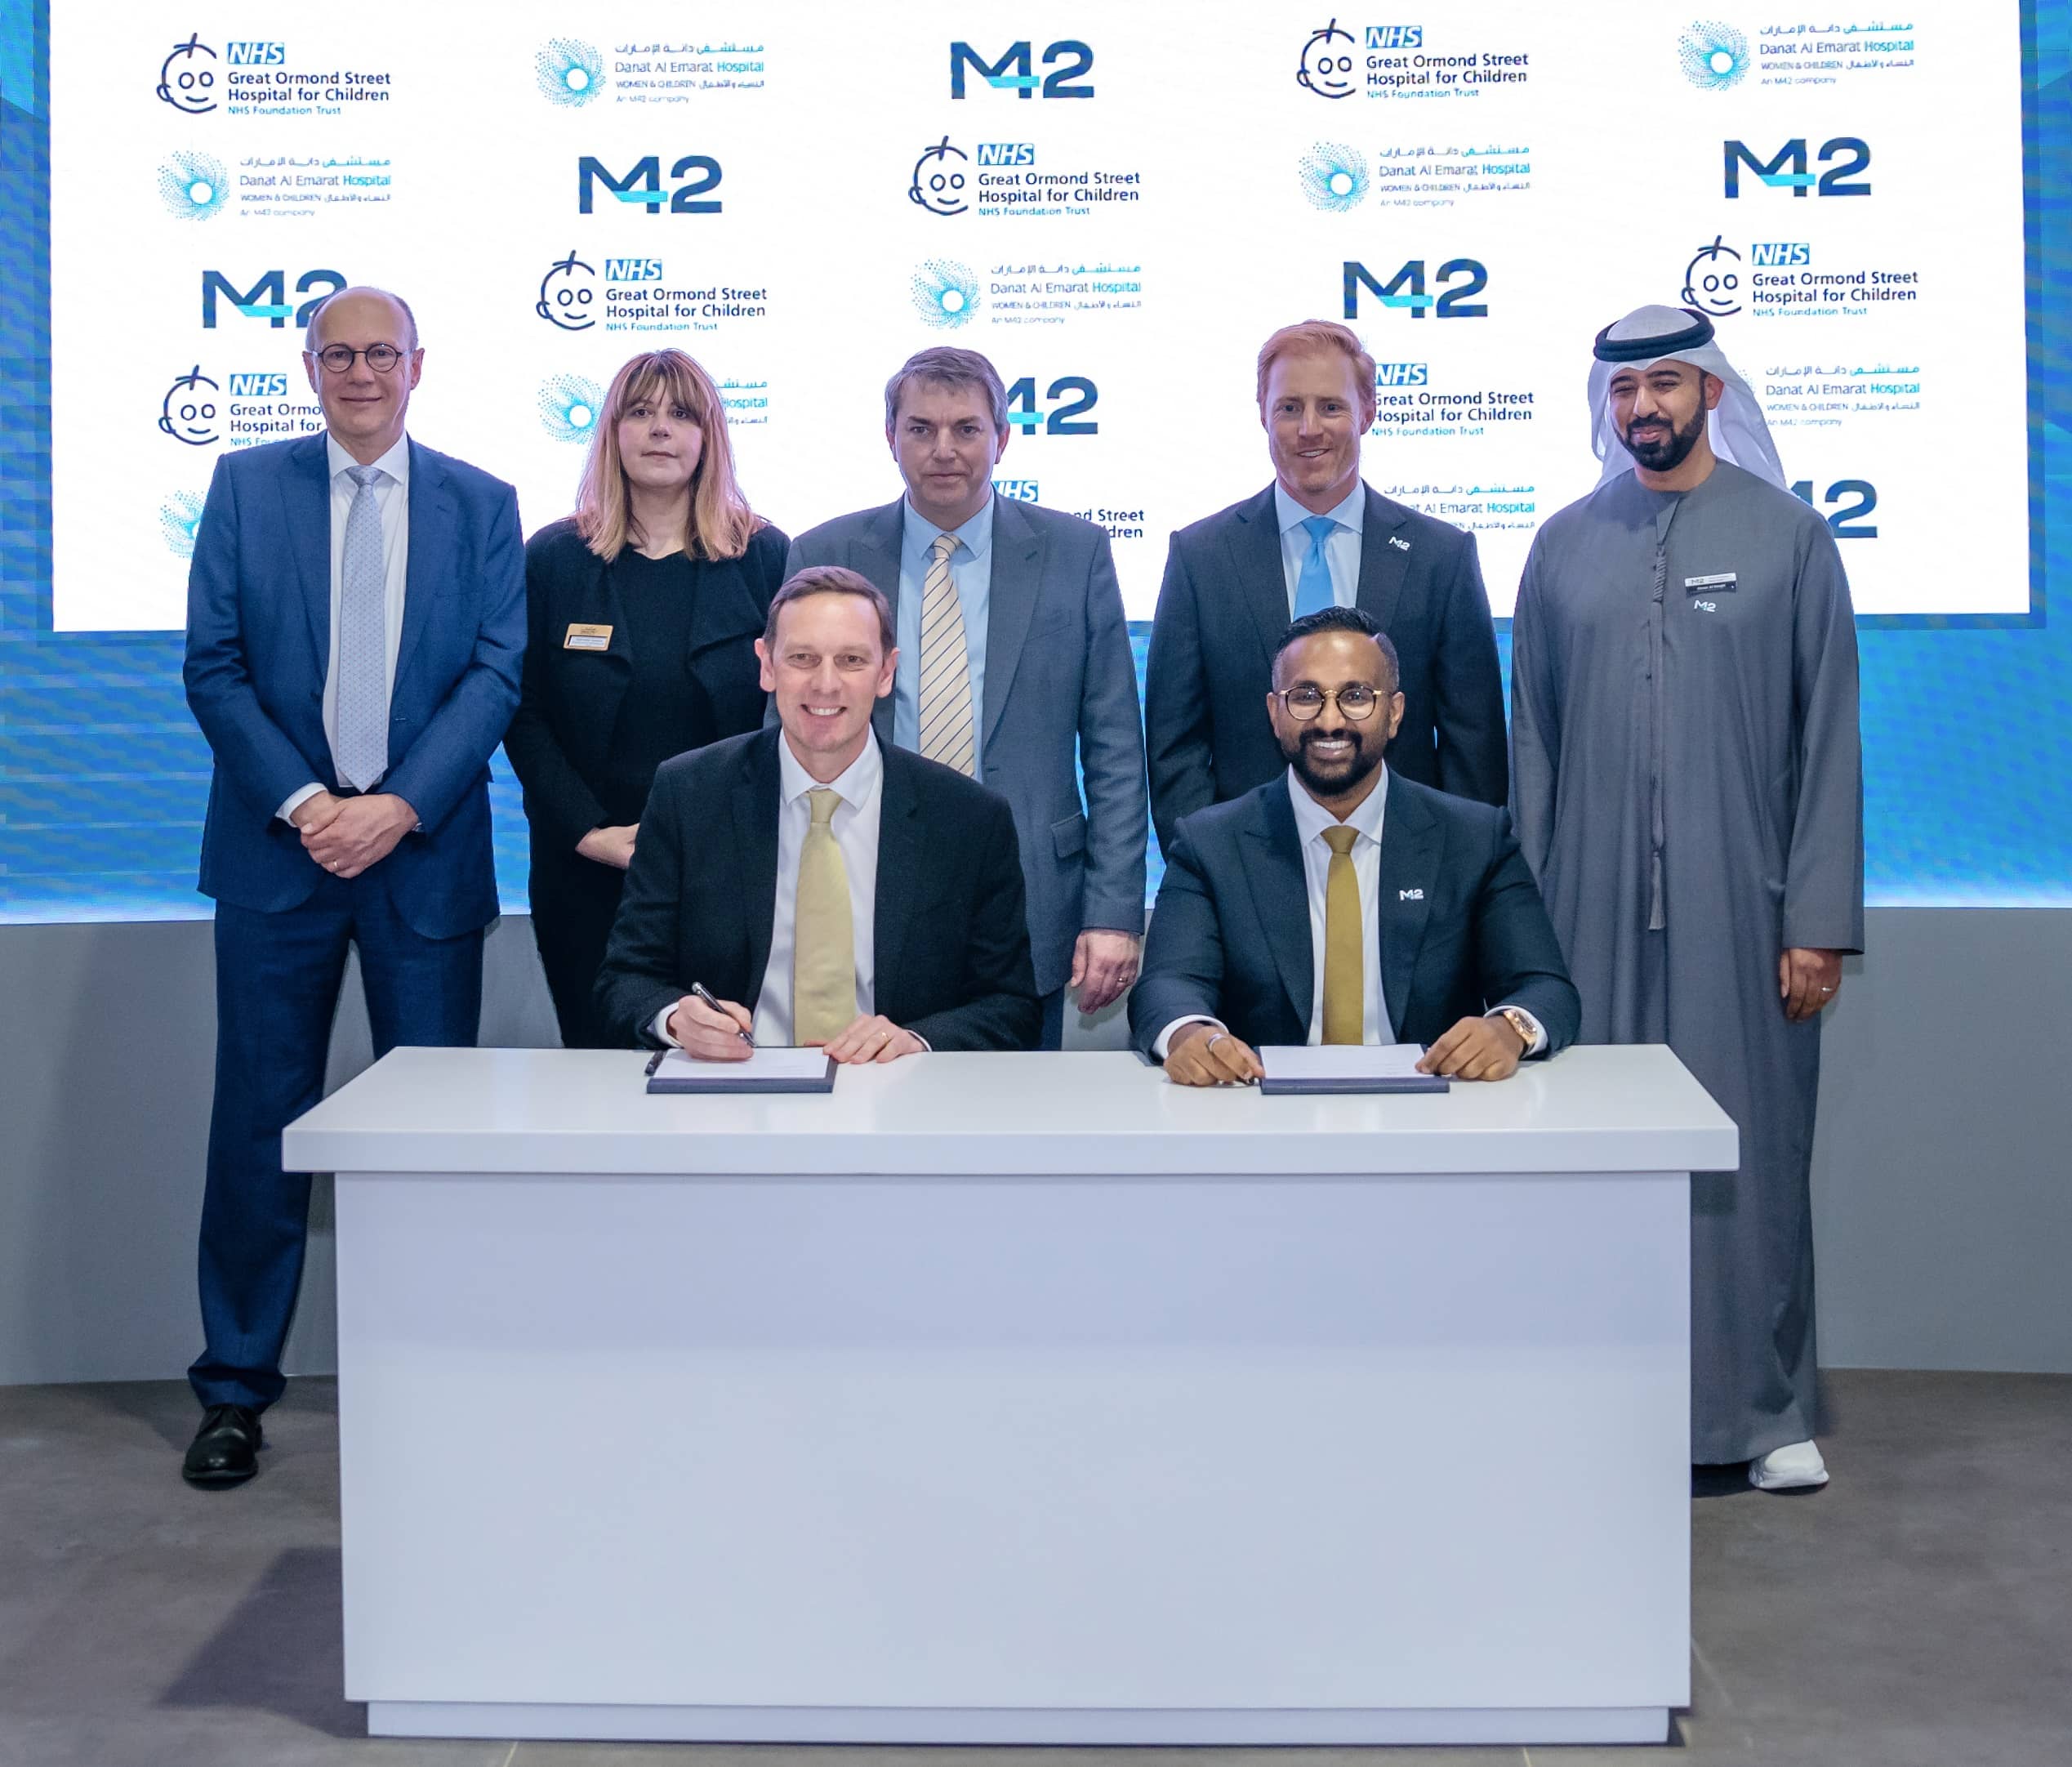 Signing ceremony between M42 and Great Ormond Street Hospital representatives